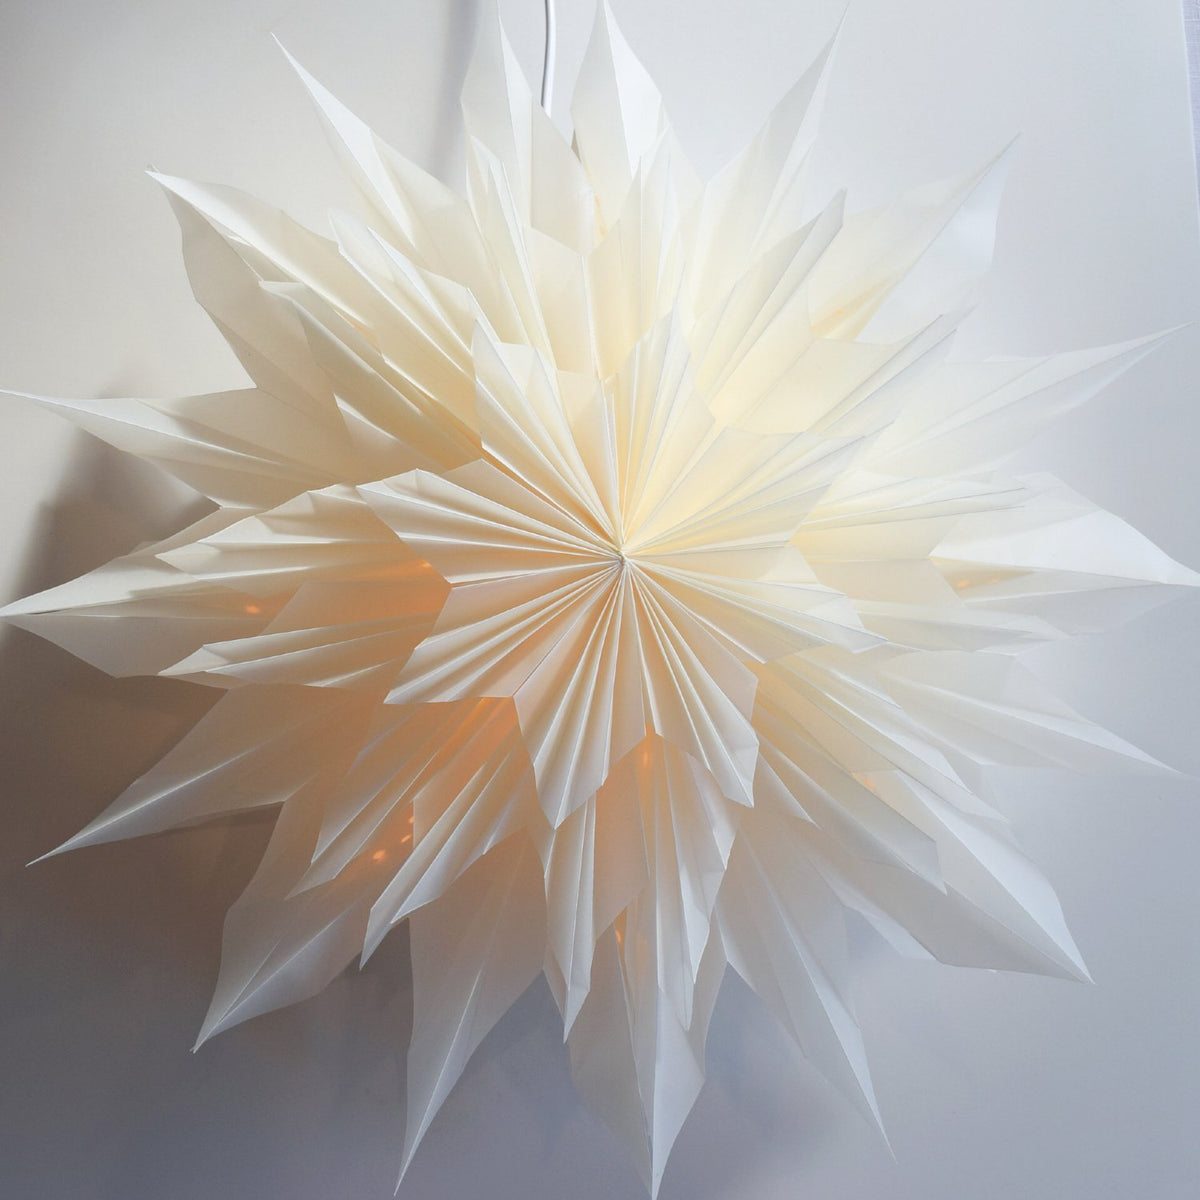 24" White Apricity Snowflake Star Lantern Pizzelle Design - Great With or Without Lights - Ideal for Holiday and Snowflake Decorations, Weddings, Parties, and Home Decor